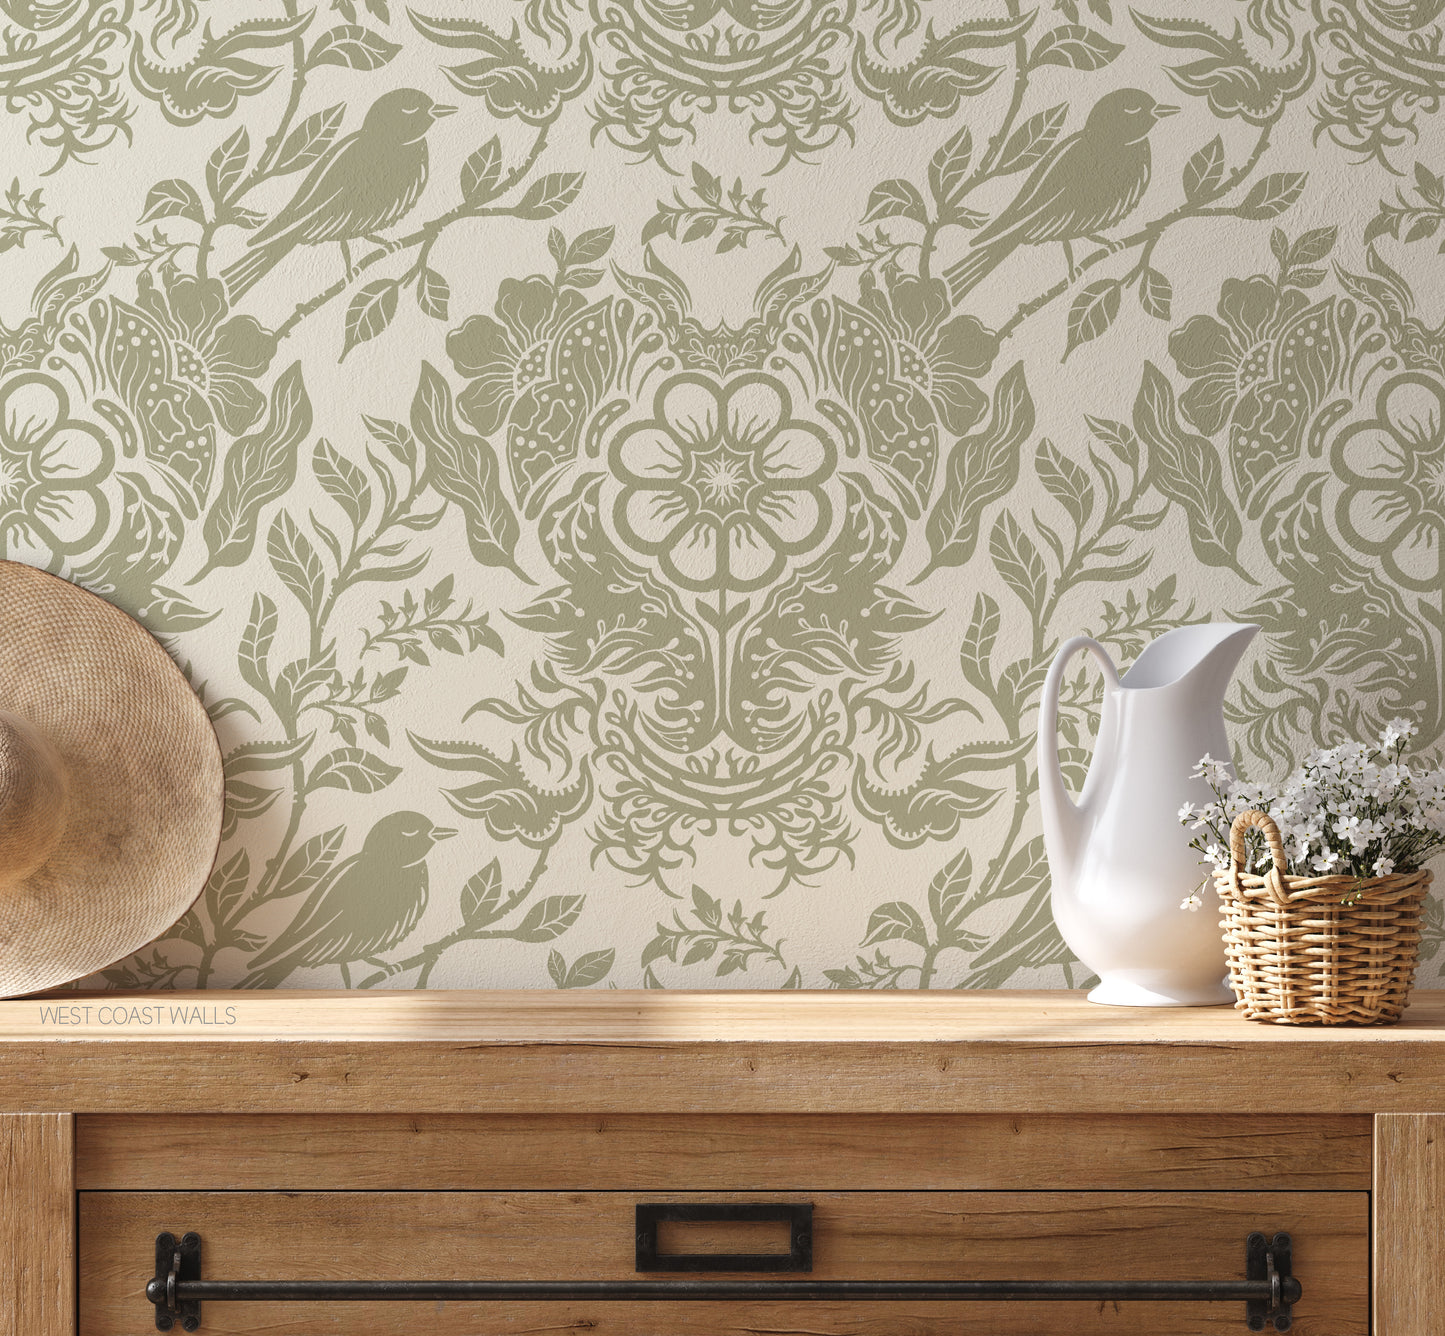 Birds and Branches Wallpaper (Papillon Patterns x West Coast Walls)